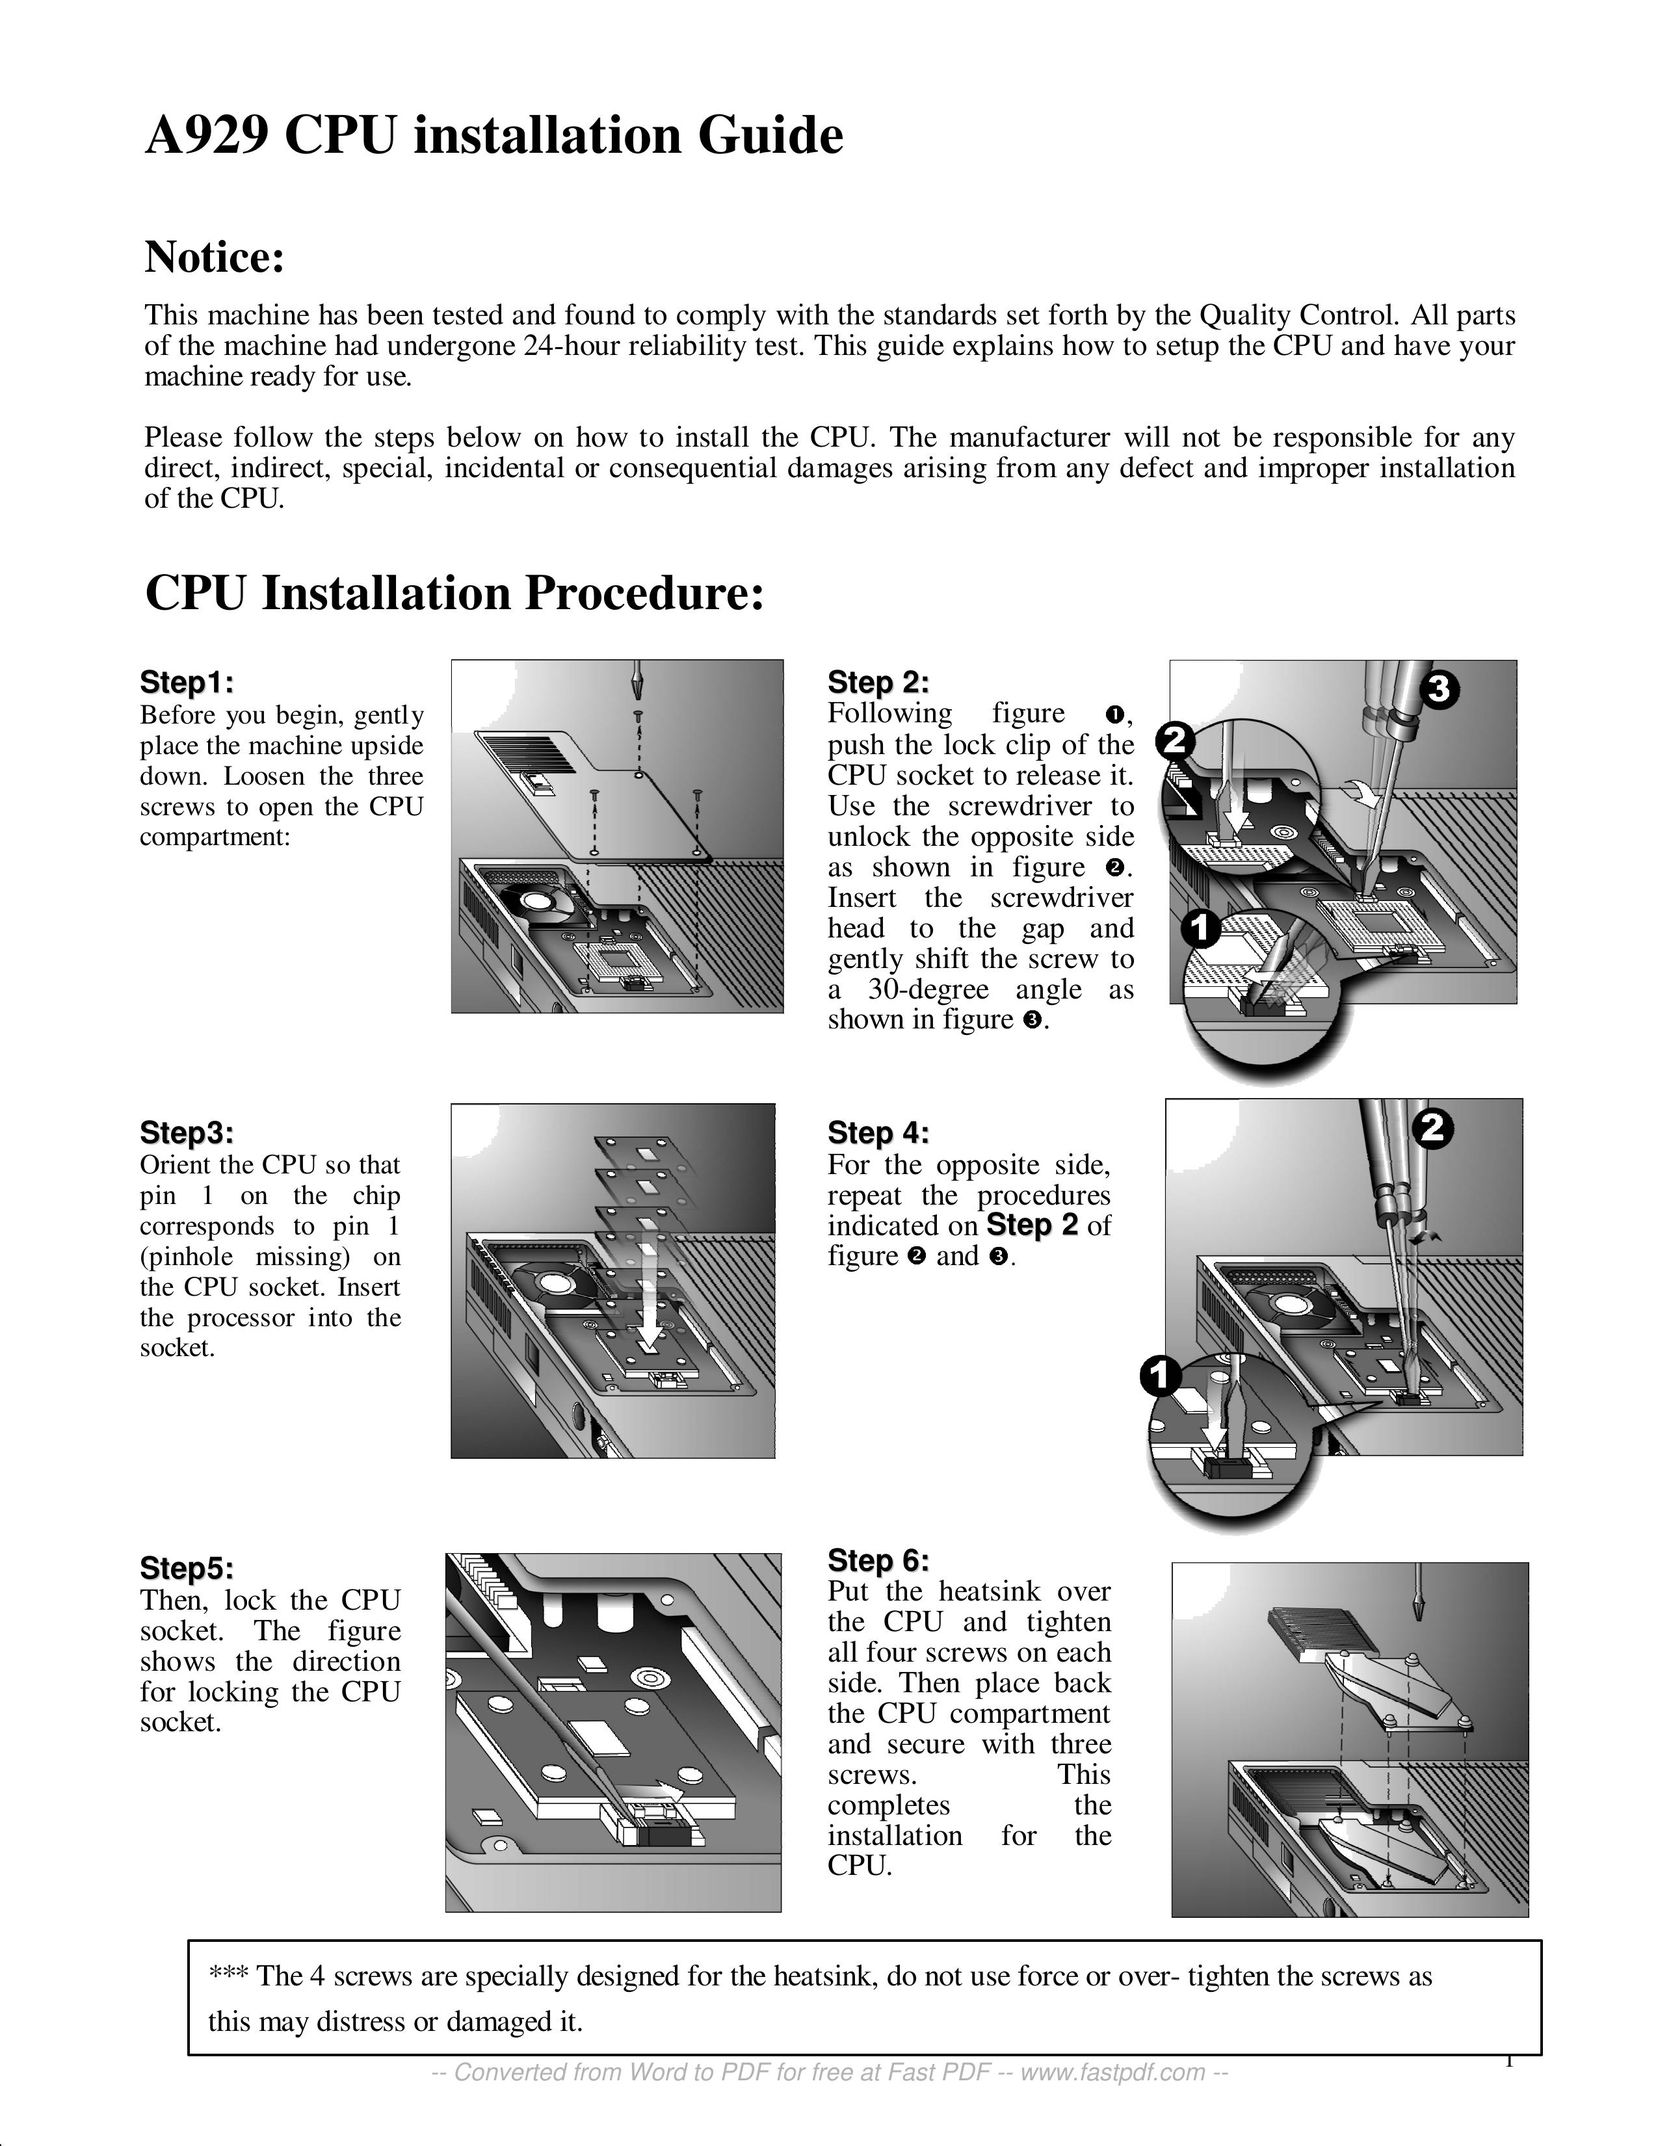 PC Chips A929 Computer Drive User Manual